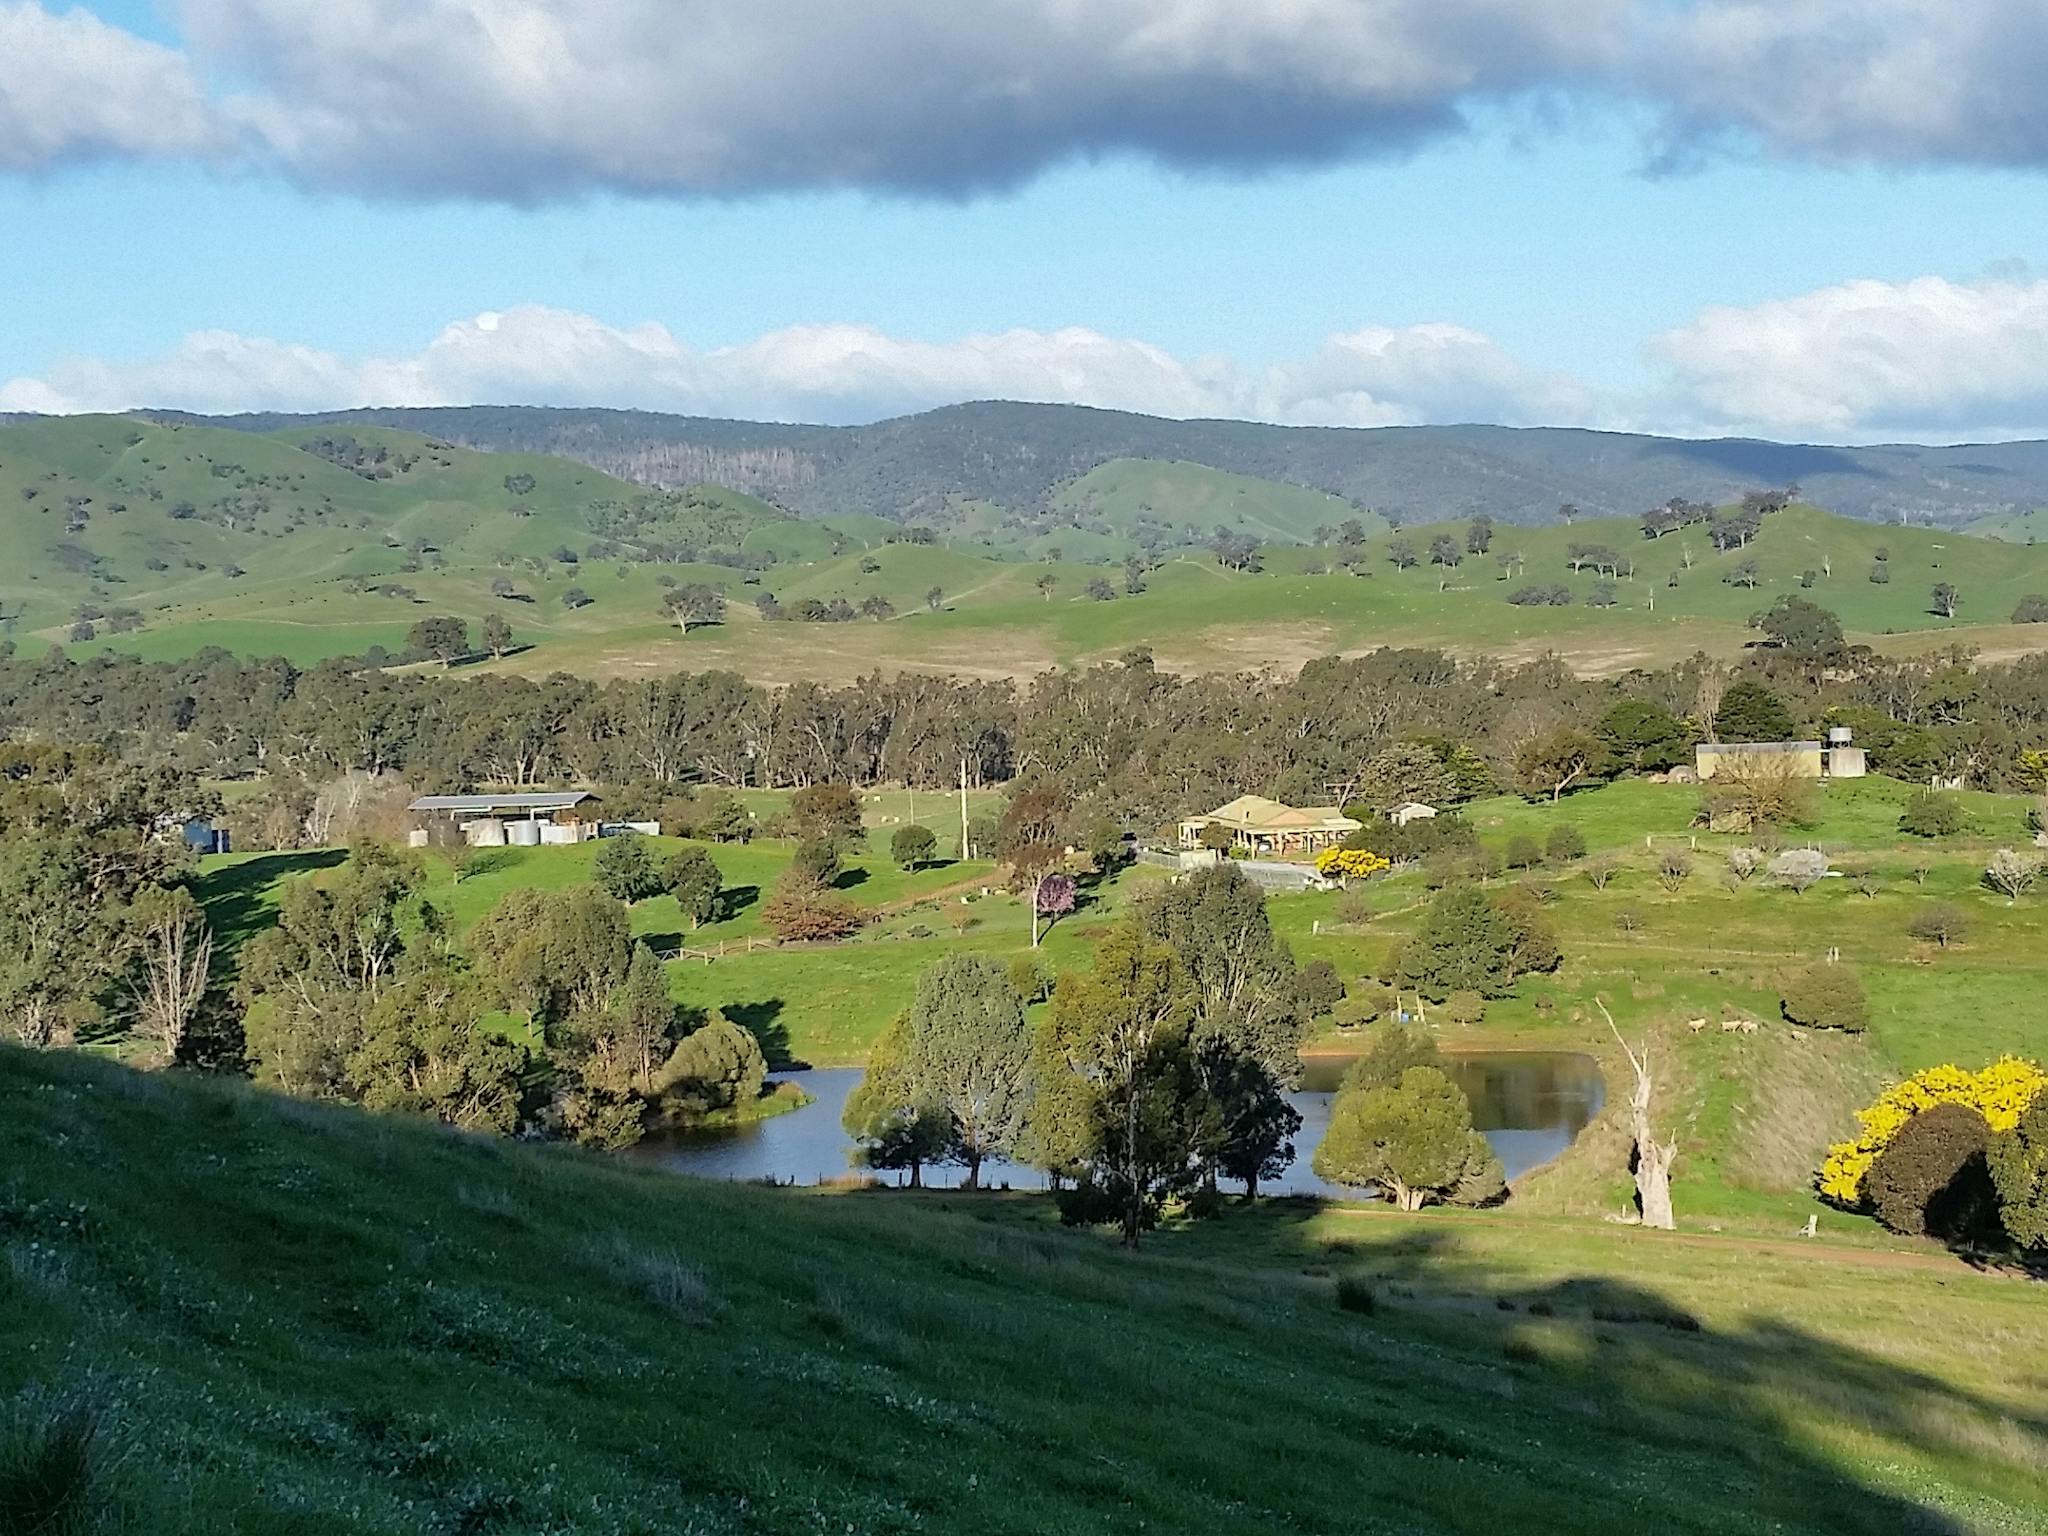 Looking east across the basin of the property towards the hills of theBlack Range in the distance.